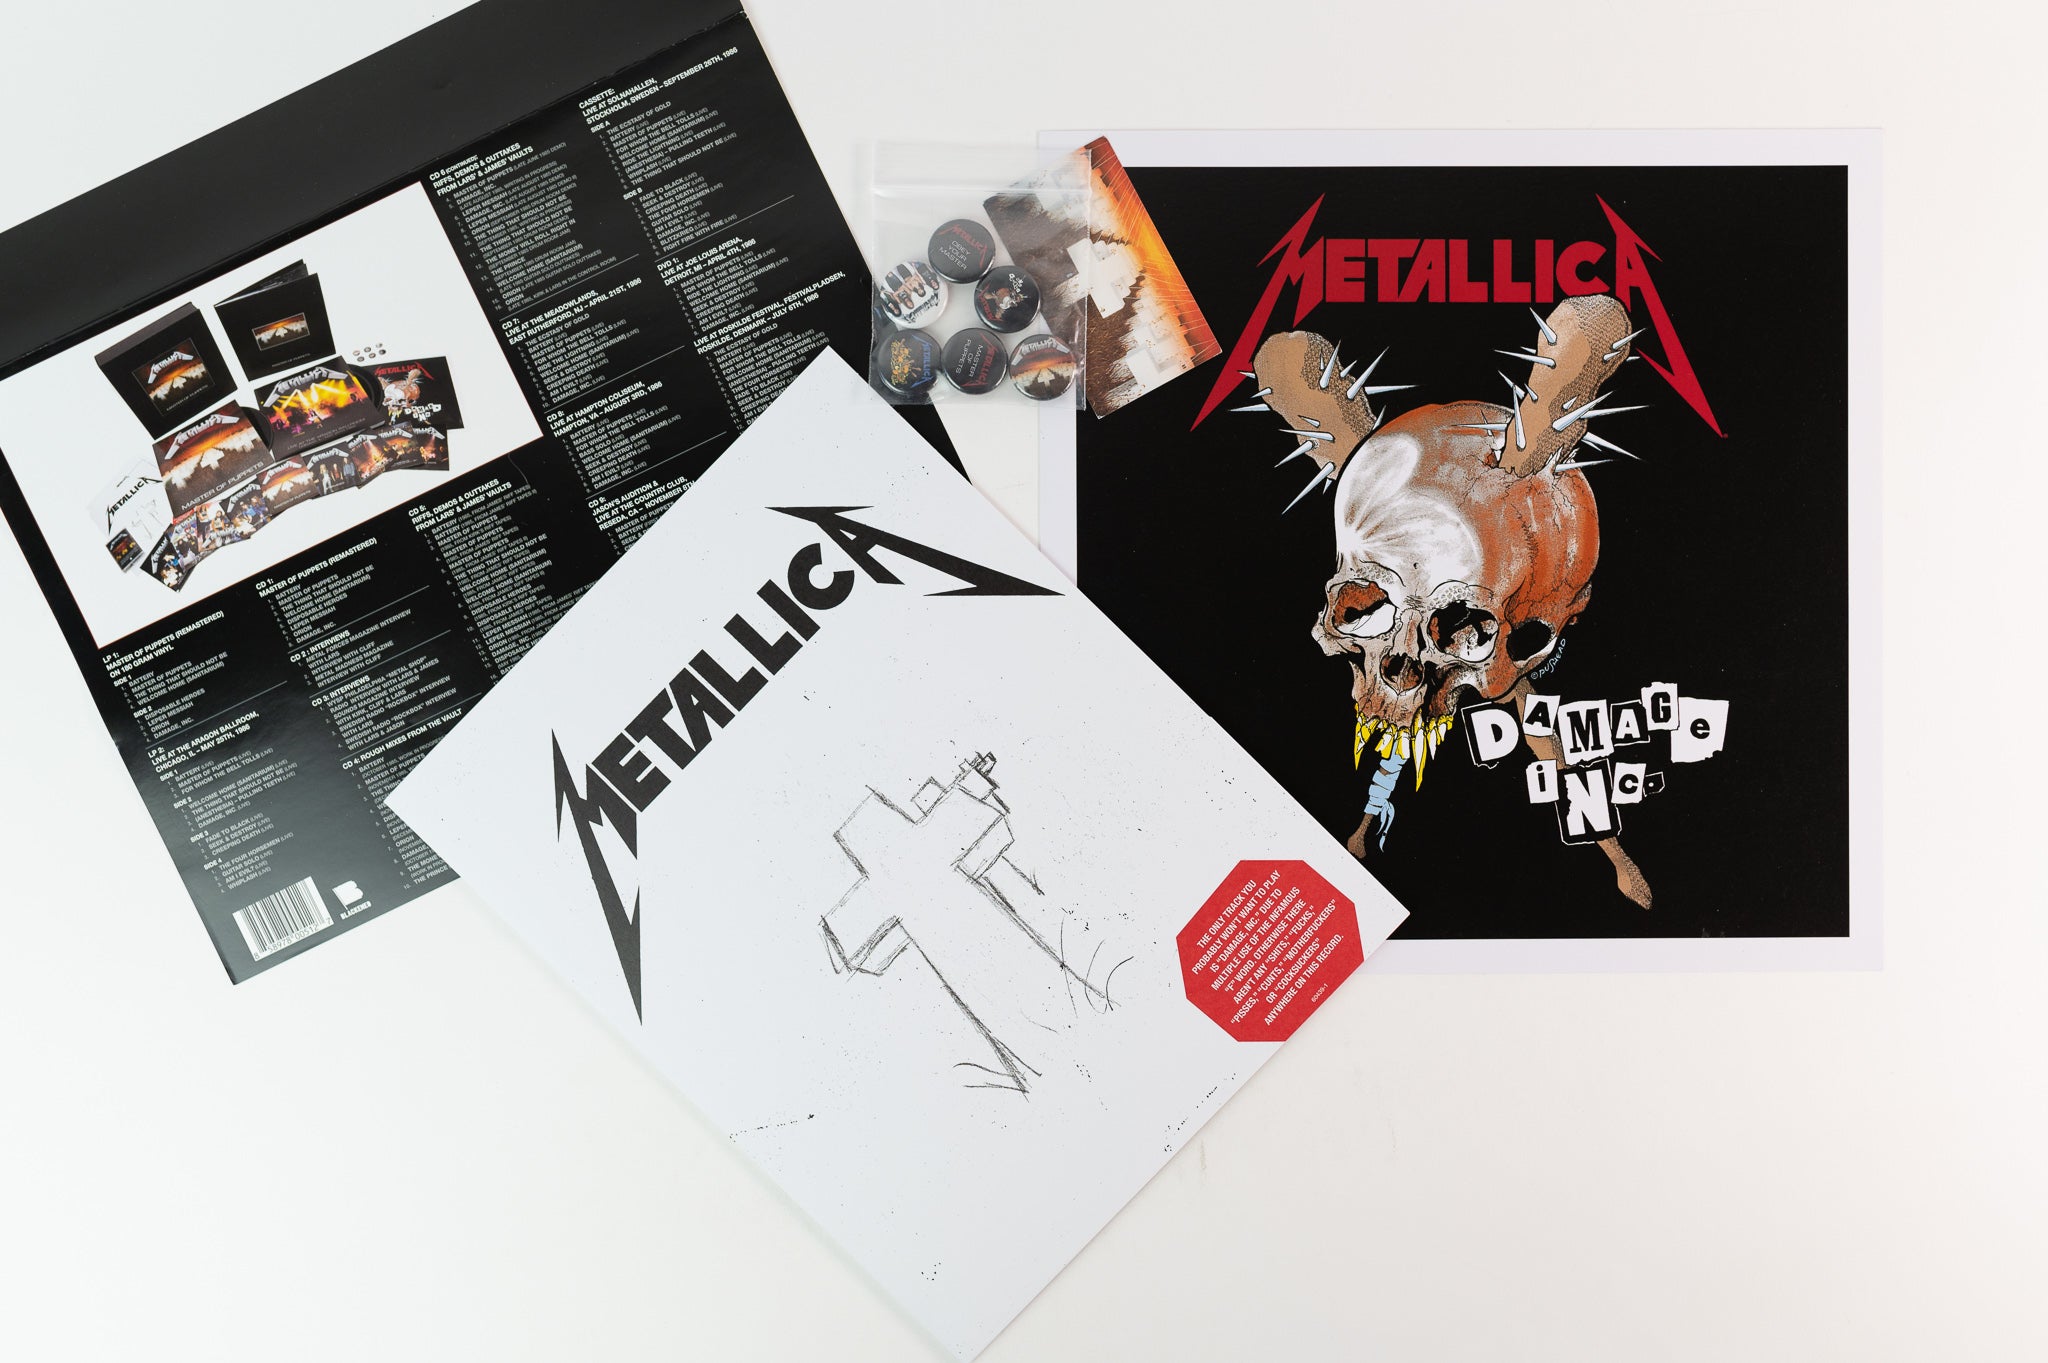 Metallica - Master Of Puppets on Blackened Limited Edition Deluxe Numbered Reissue Box Set